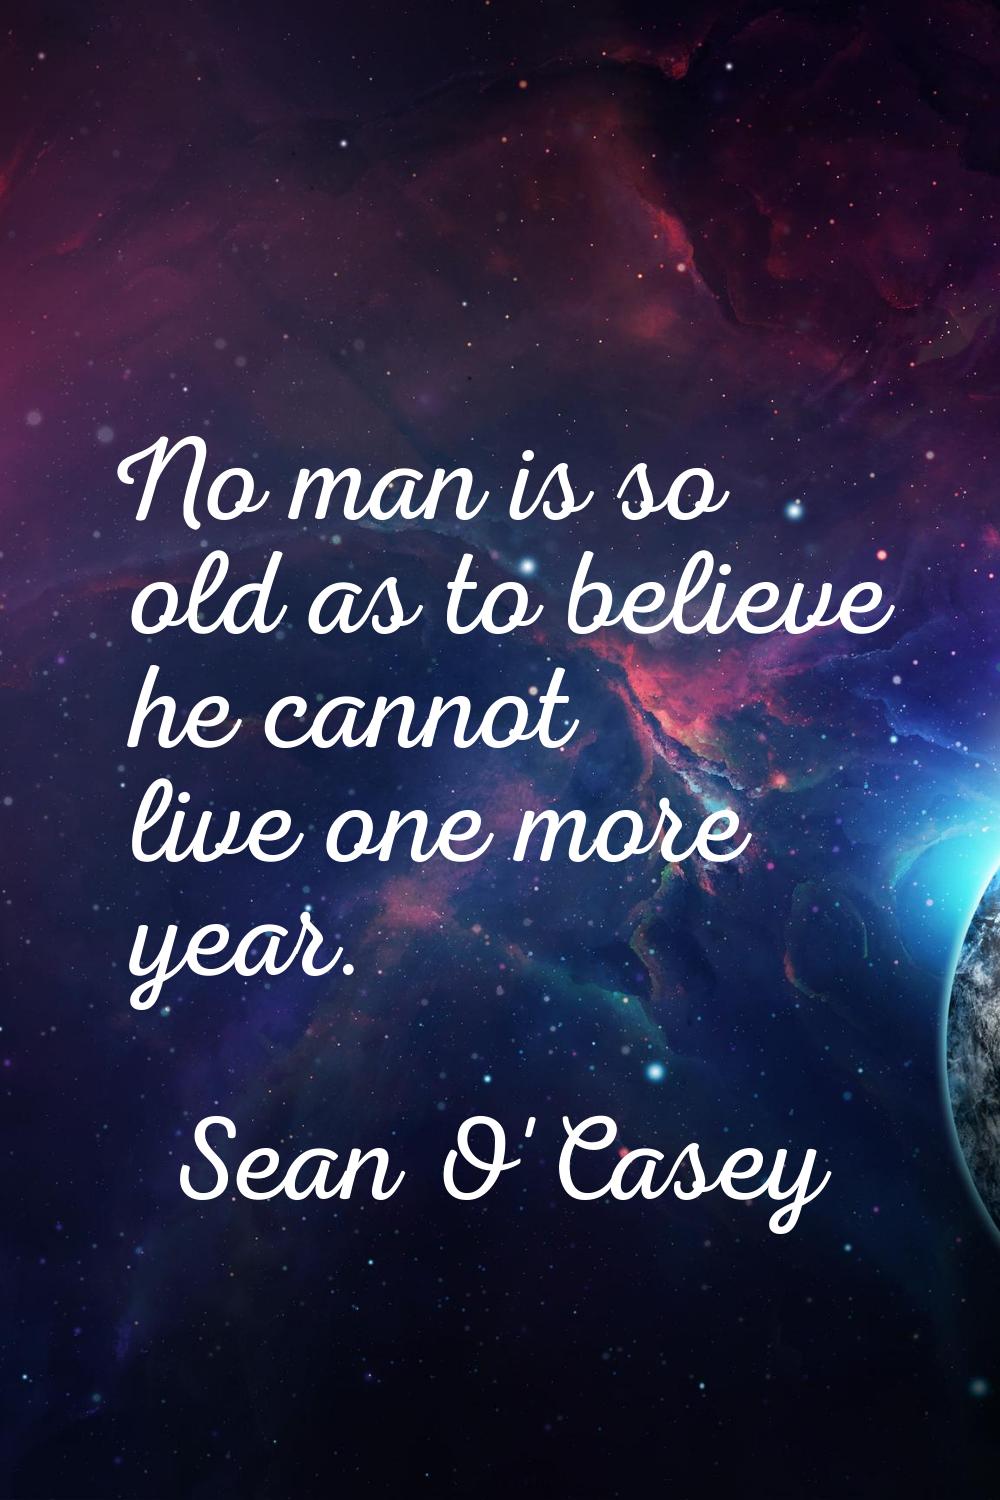 No man is so old as to believe he cannot live one more year.